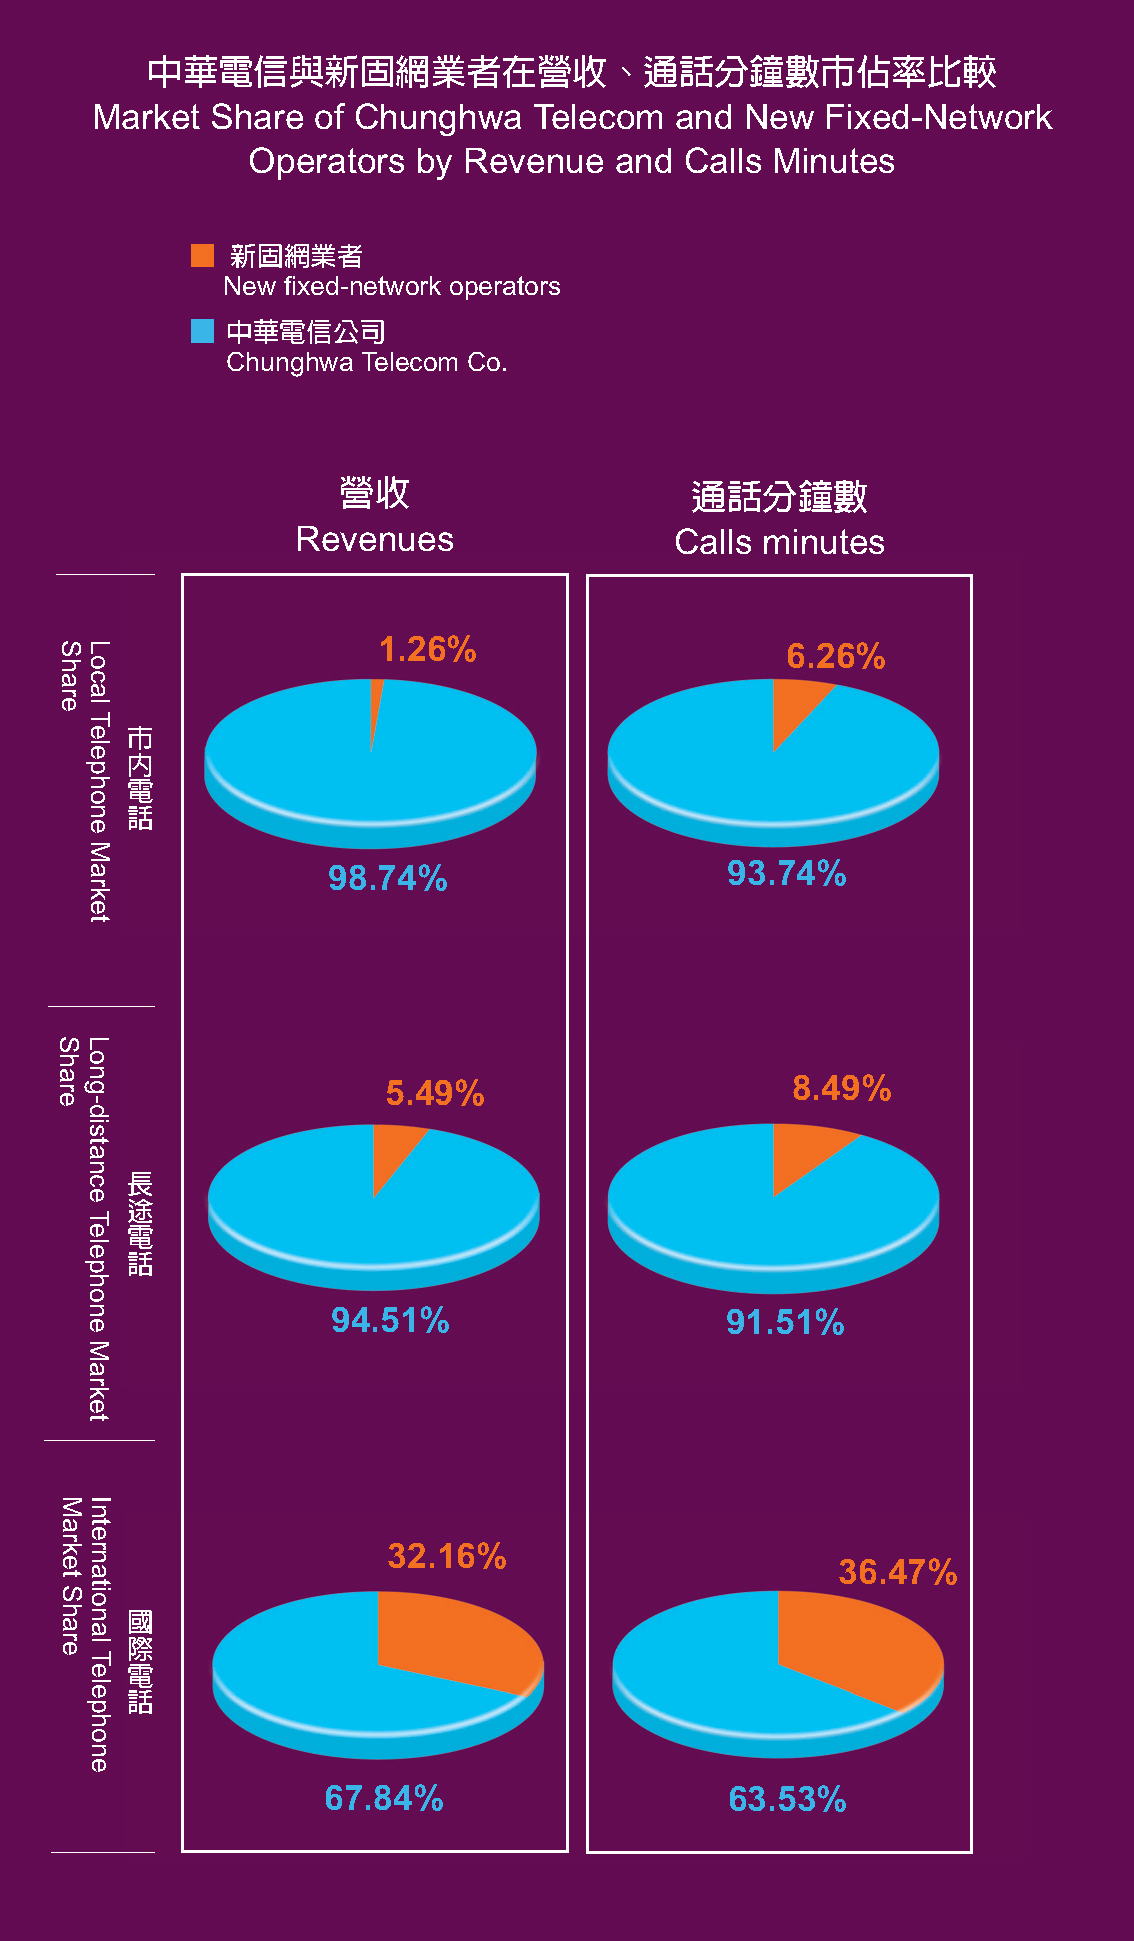 Market Share of Chunghwa Telecom and New Fixed-Network Operators by Revenue and Calls Minutes